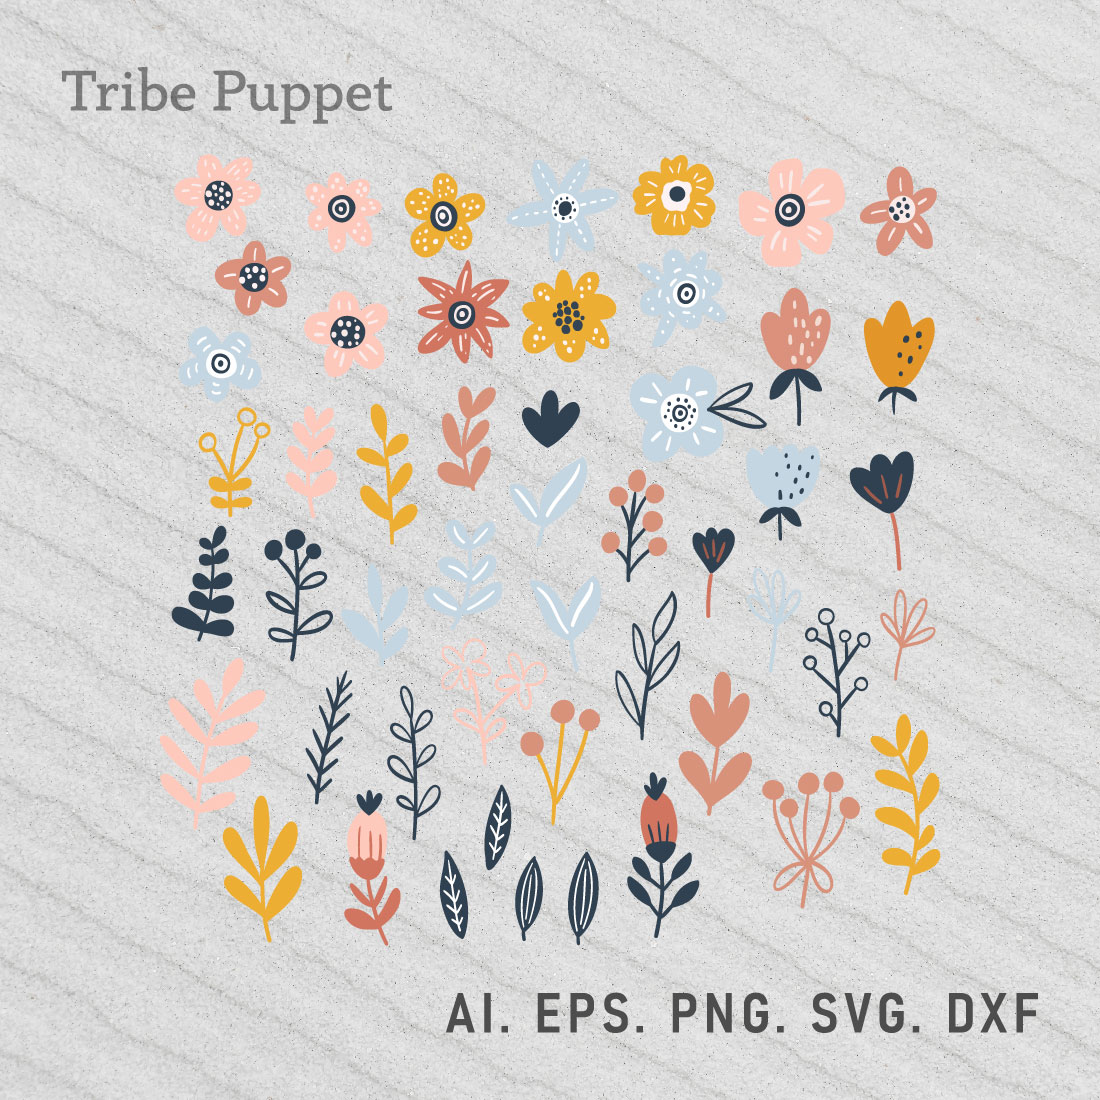 Collection of flowers and plants with the words tribe puppett.